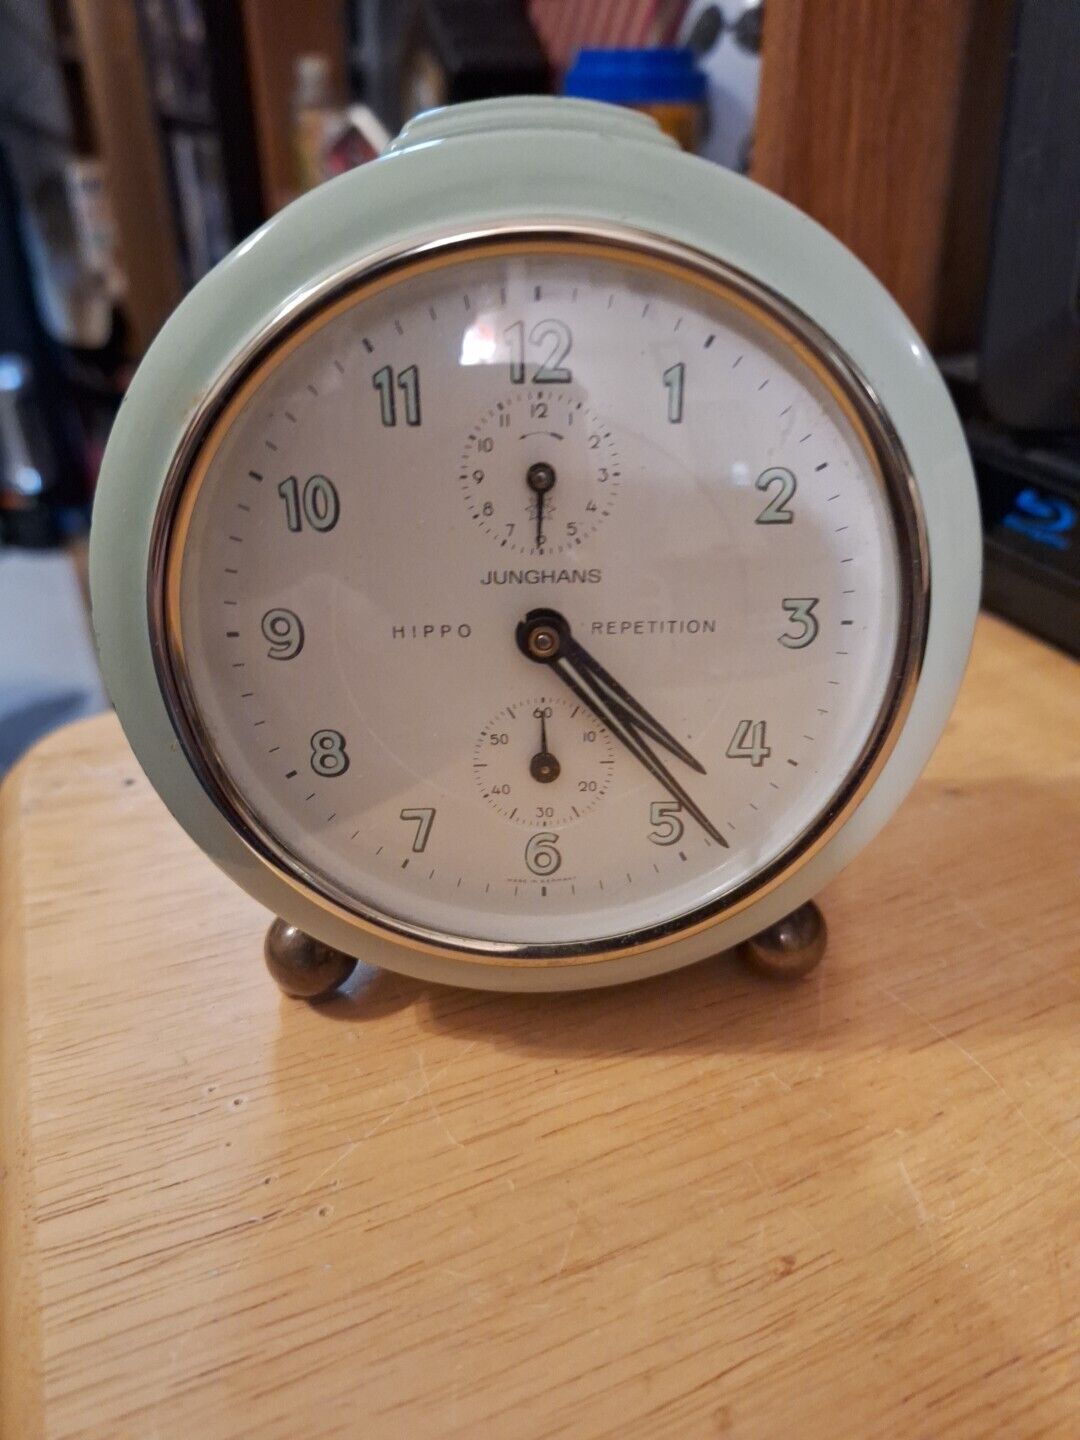 Junghans Hippo Repetition Alarm Clock Running Condition